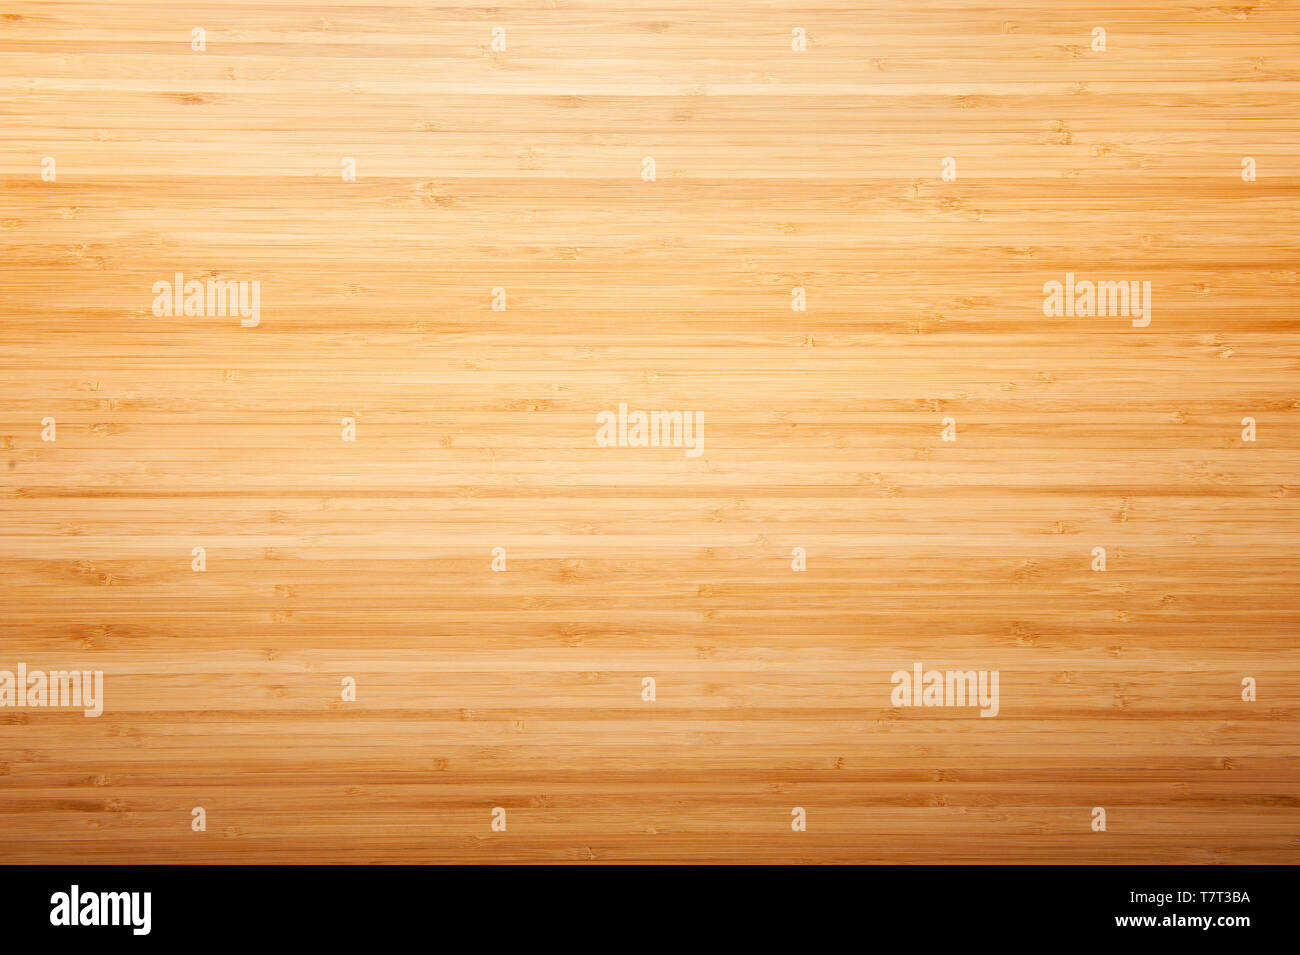 https://c8.alamy.com/comp/T7T3BA/bamboo-wood-texture-desk-background-natural-surface-wooden-background-top-view-T7T3BA.jpg